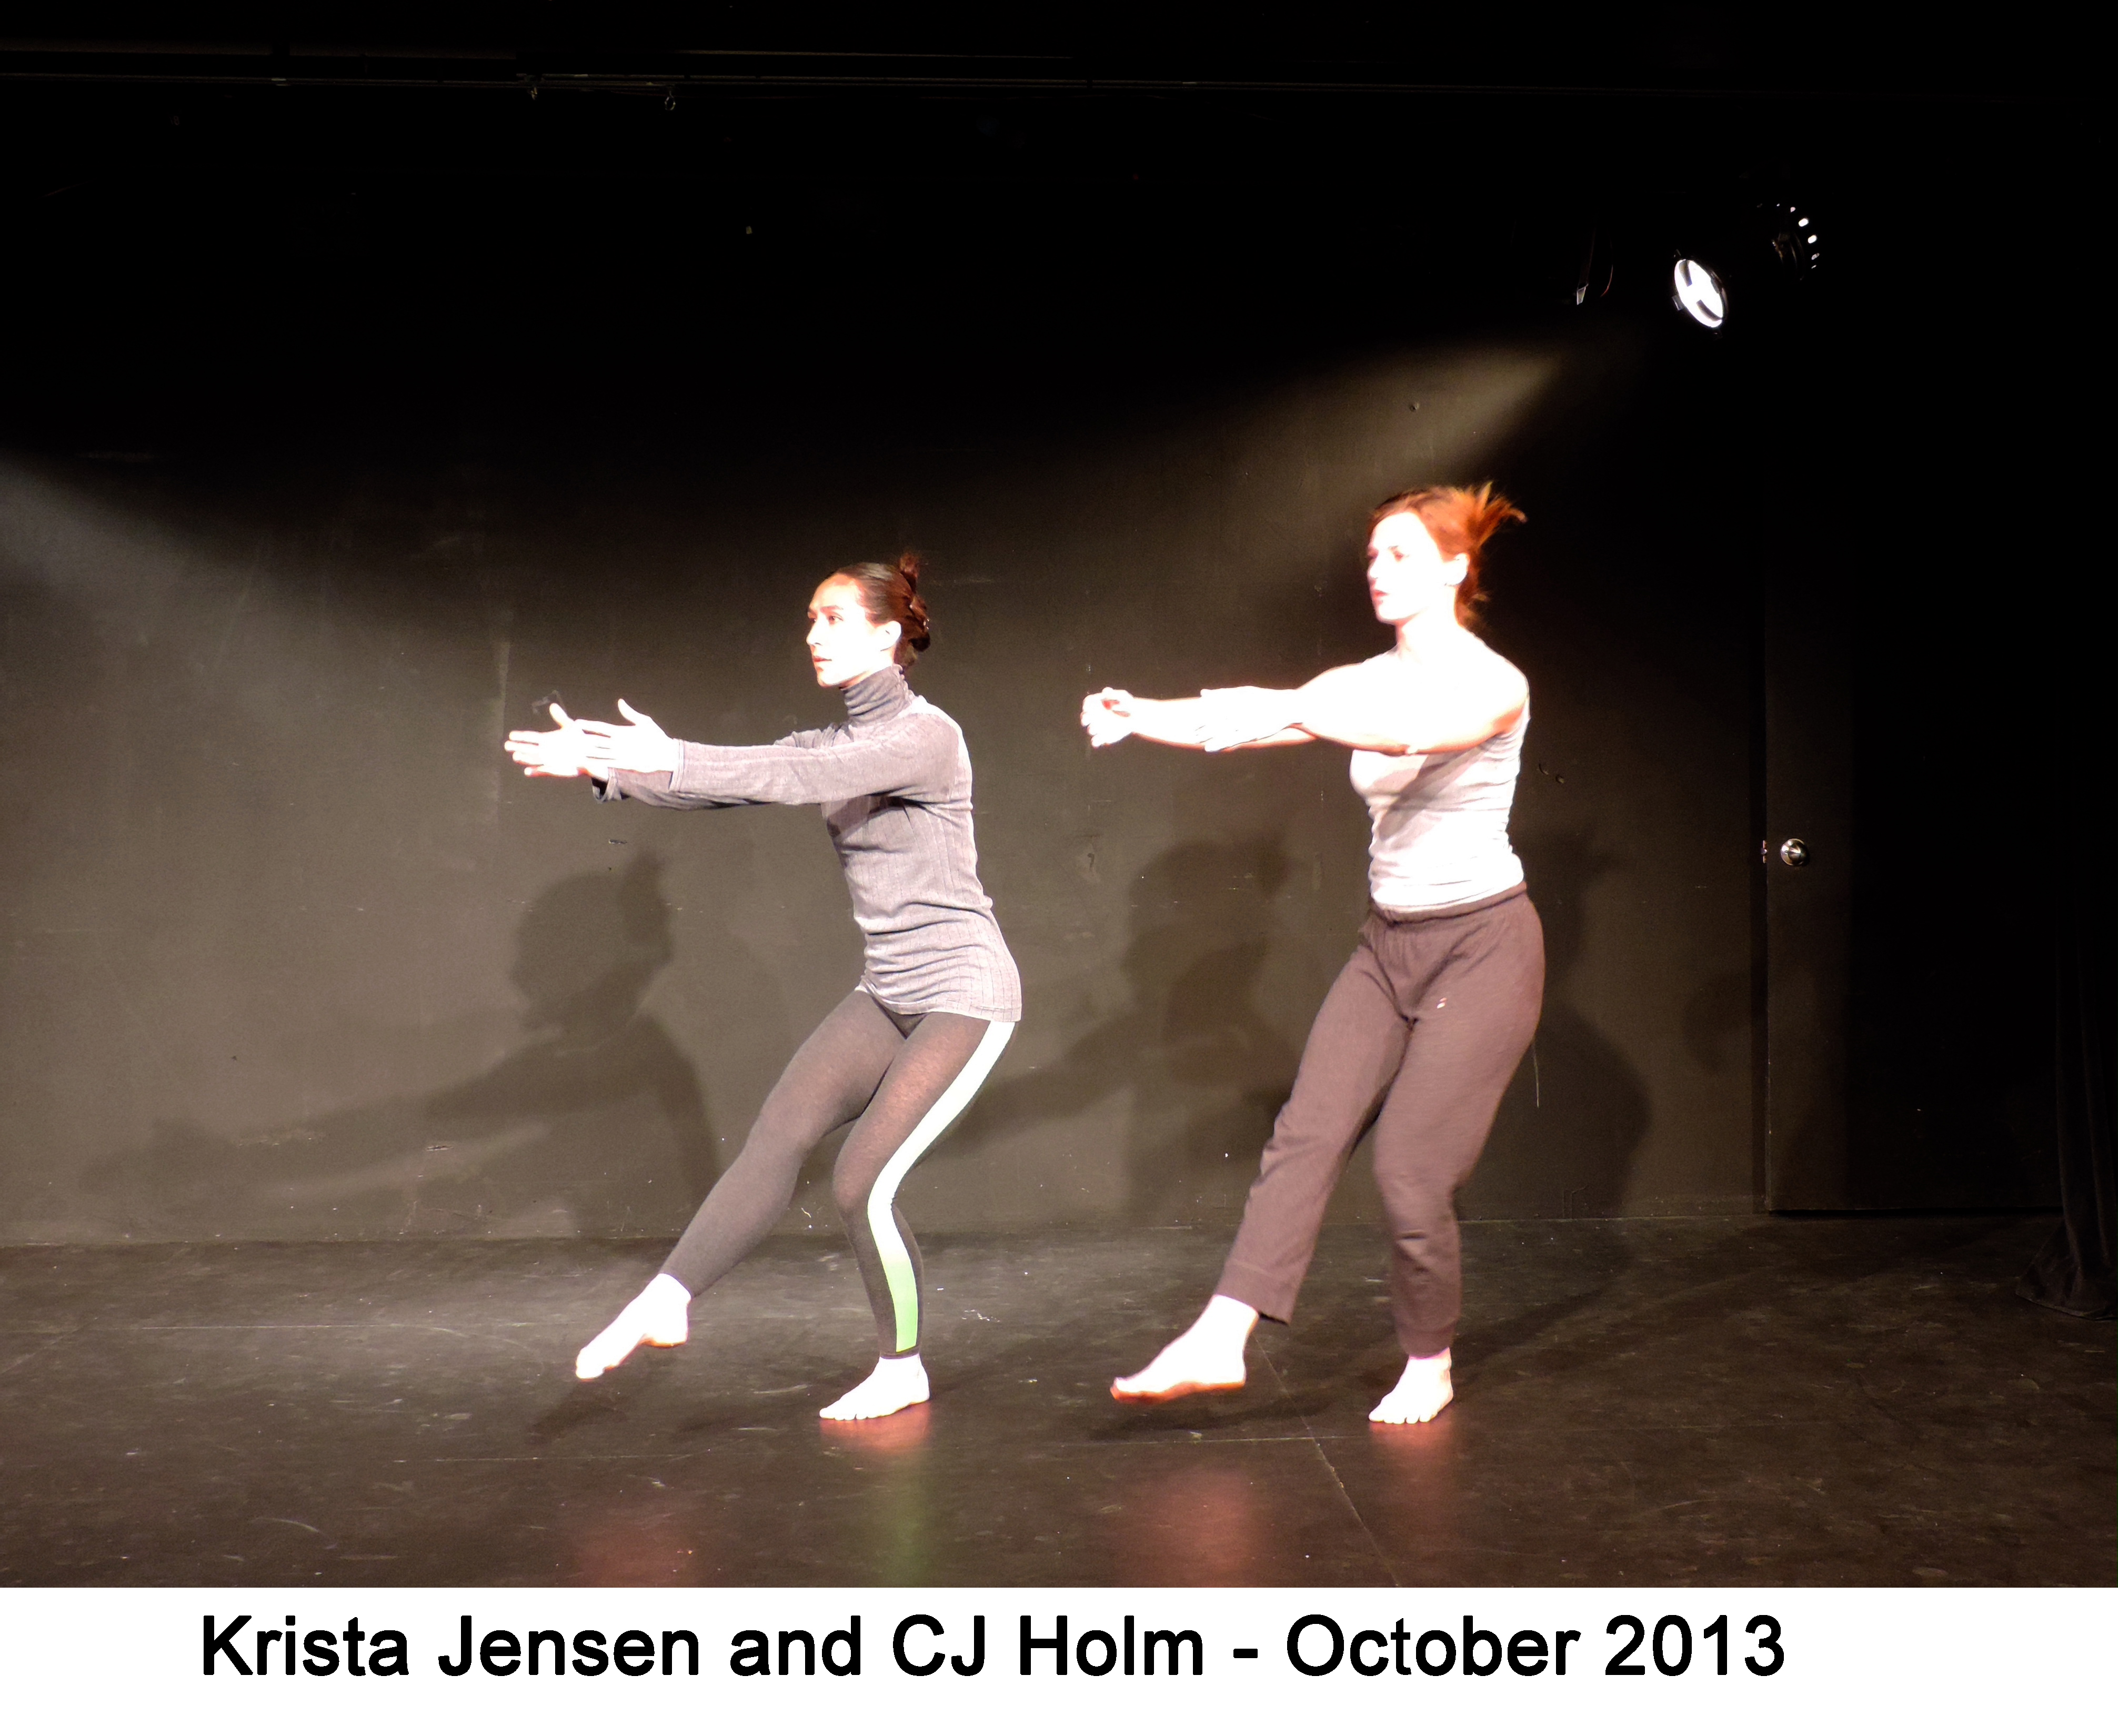 Krista and CJ are performing a movement with their arms and one leg outstretched